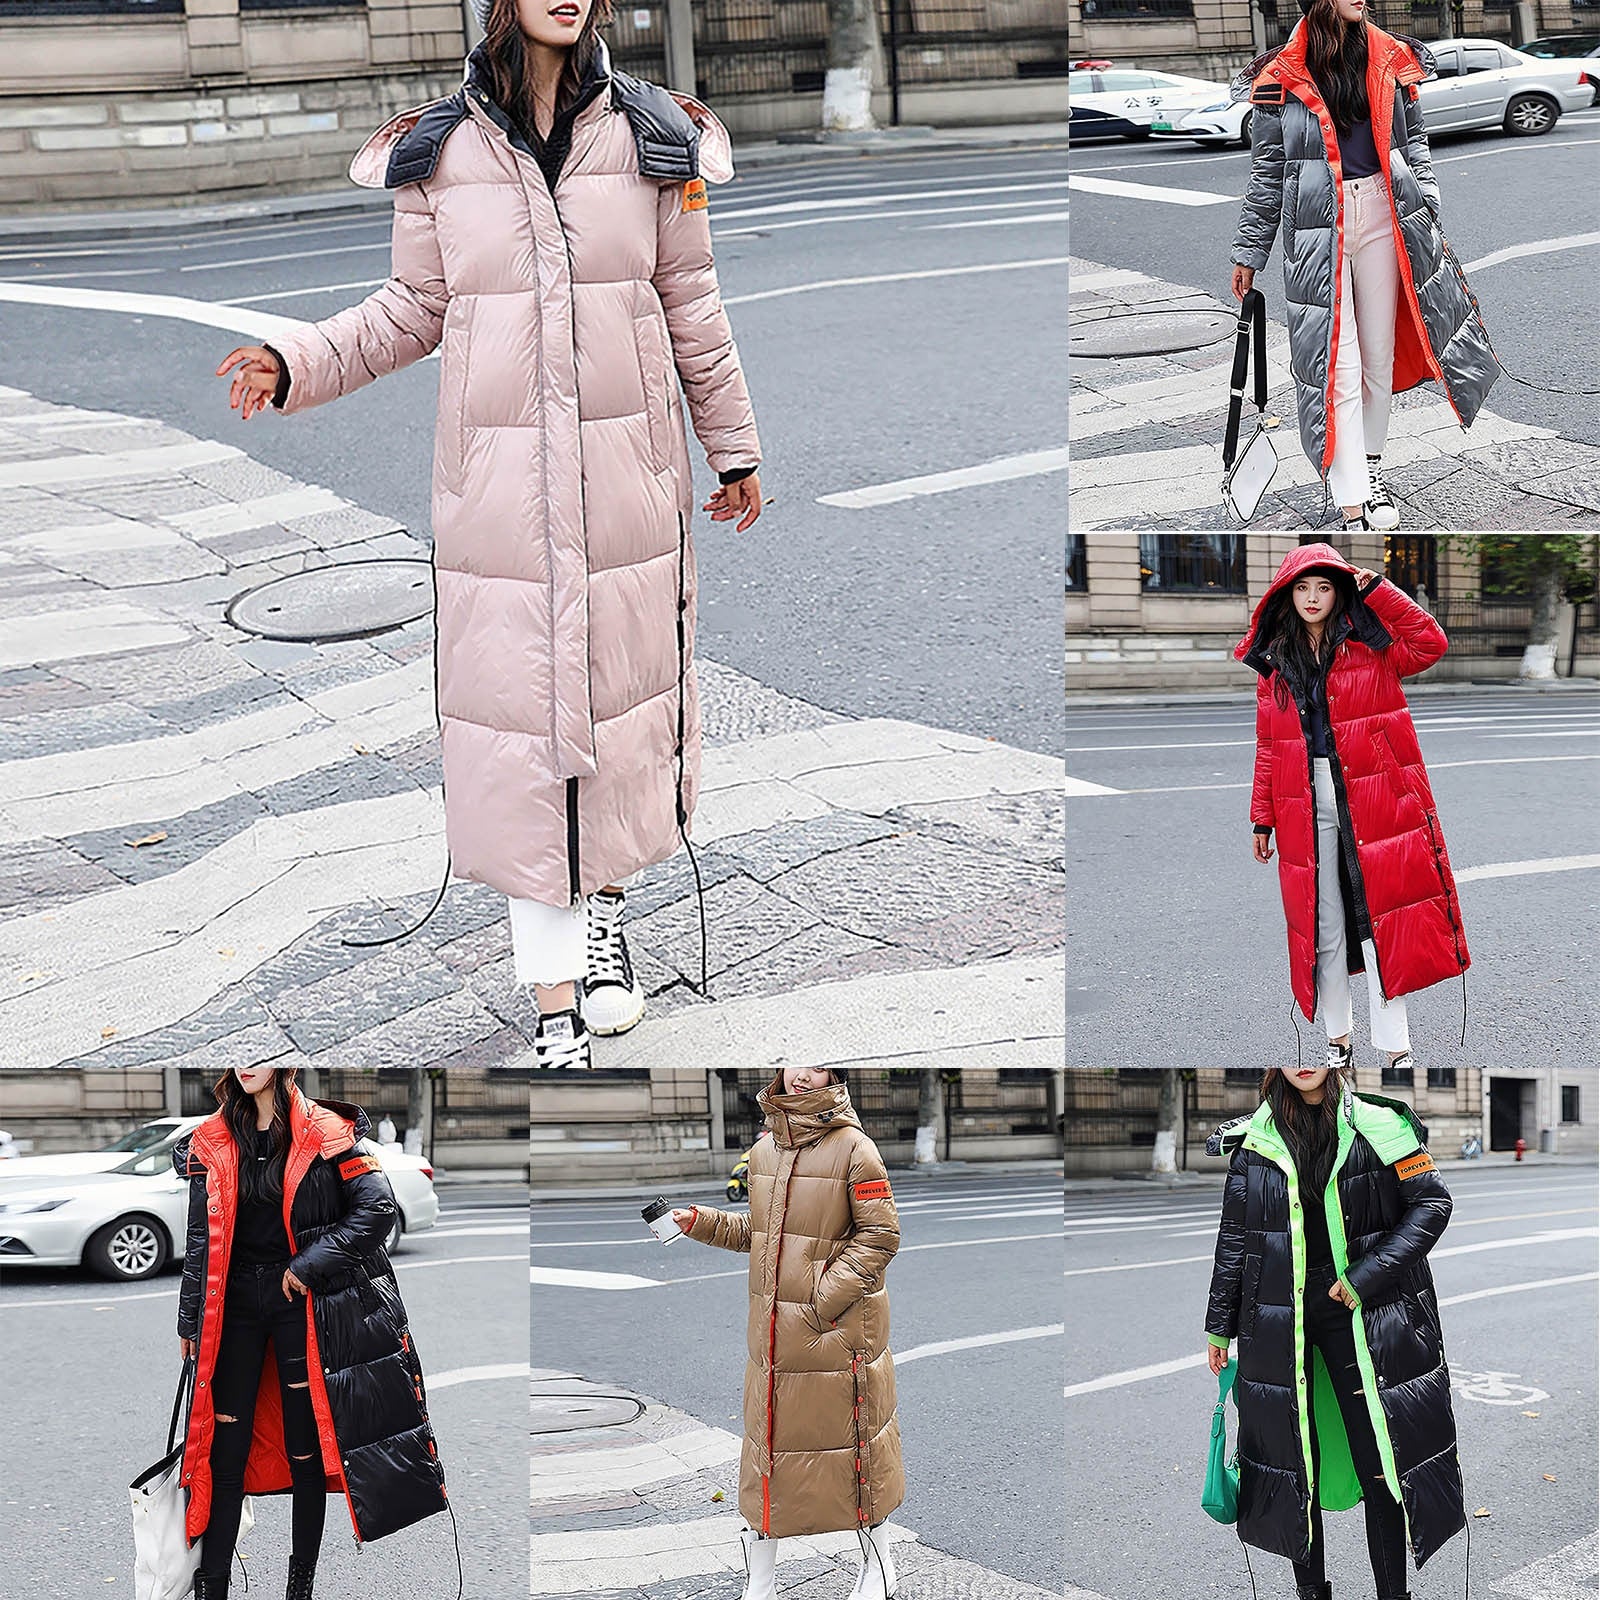 Women's Winter Fashion Glossy Long Over The Knee Hooded Thick Padded Jacket Coat Hooded padded warm padded jacket|Down Coats|